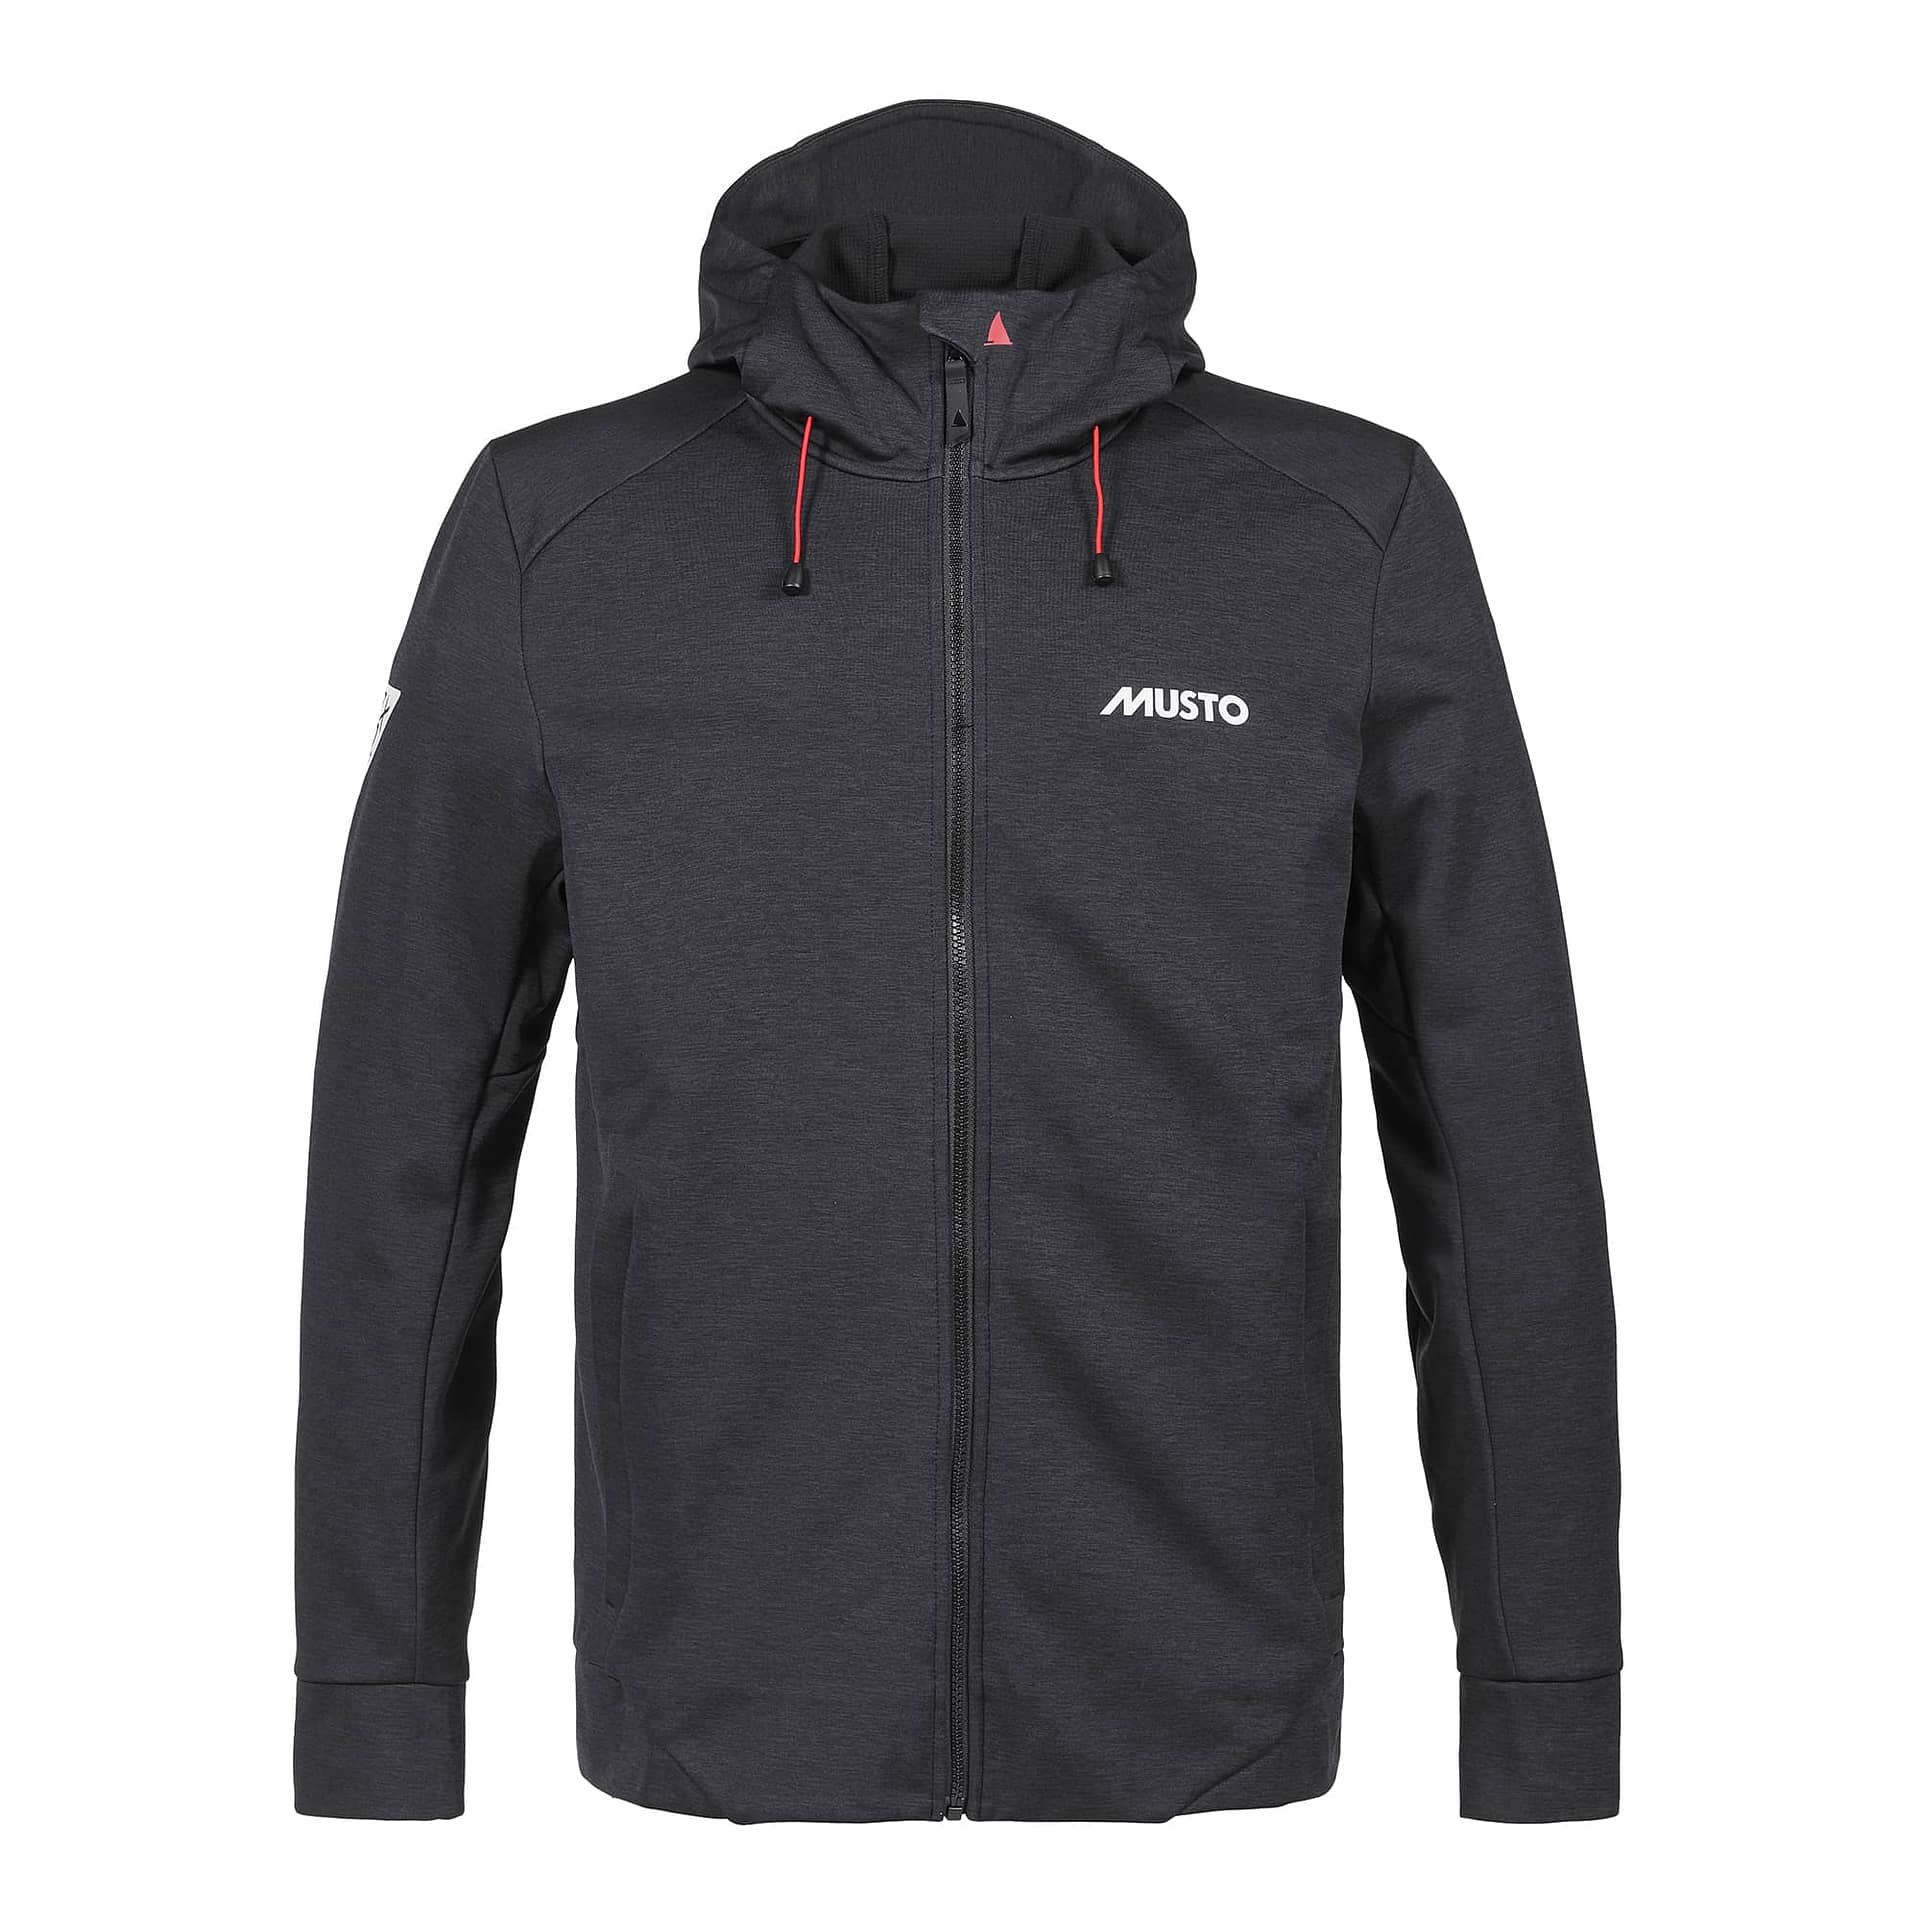 Musto Launch New And Improved LPX Foiling Range Designed With France ...